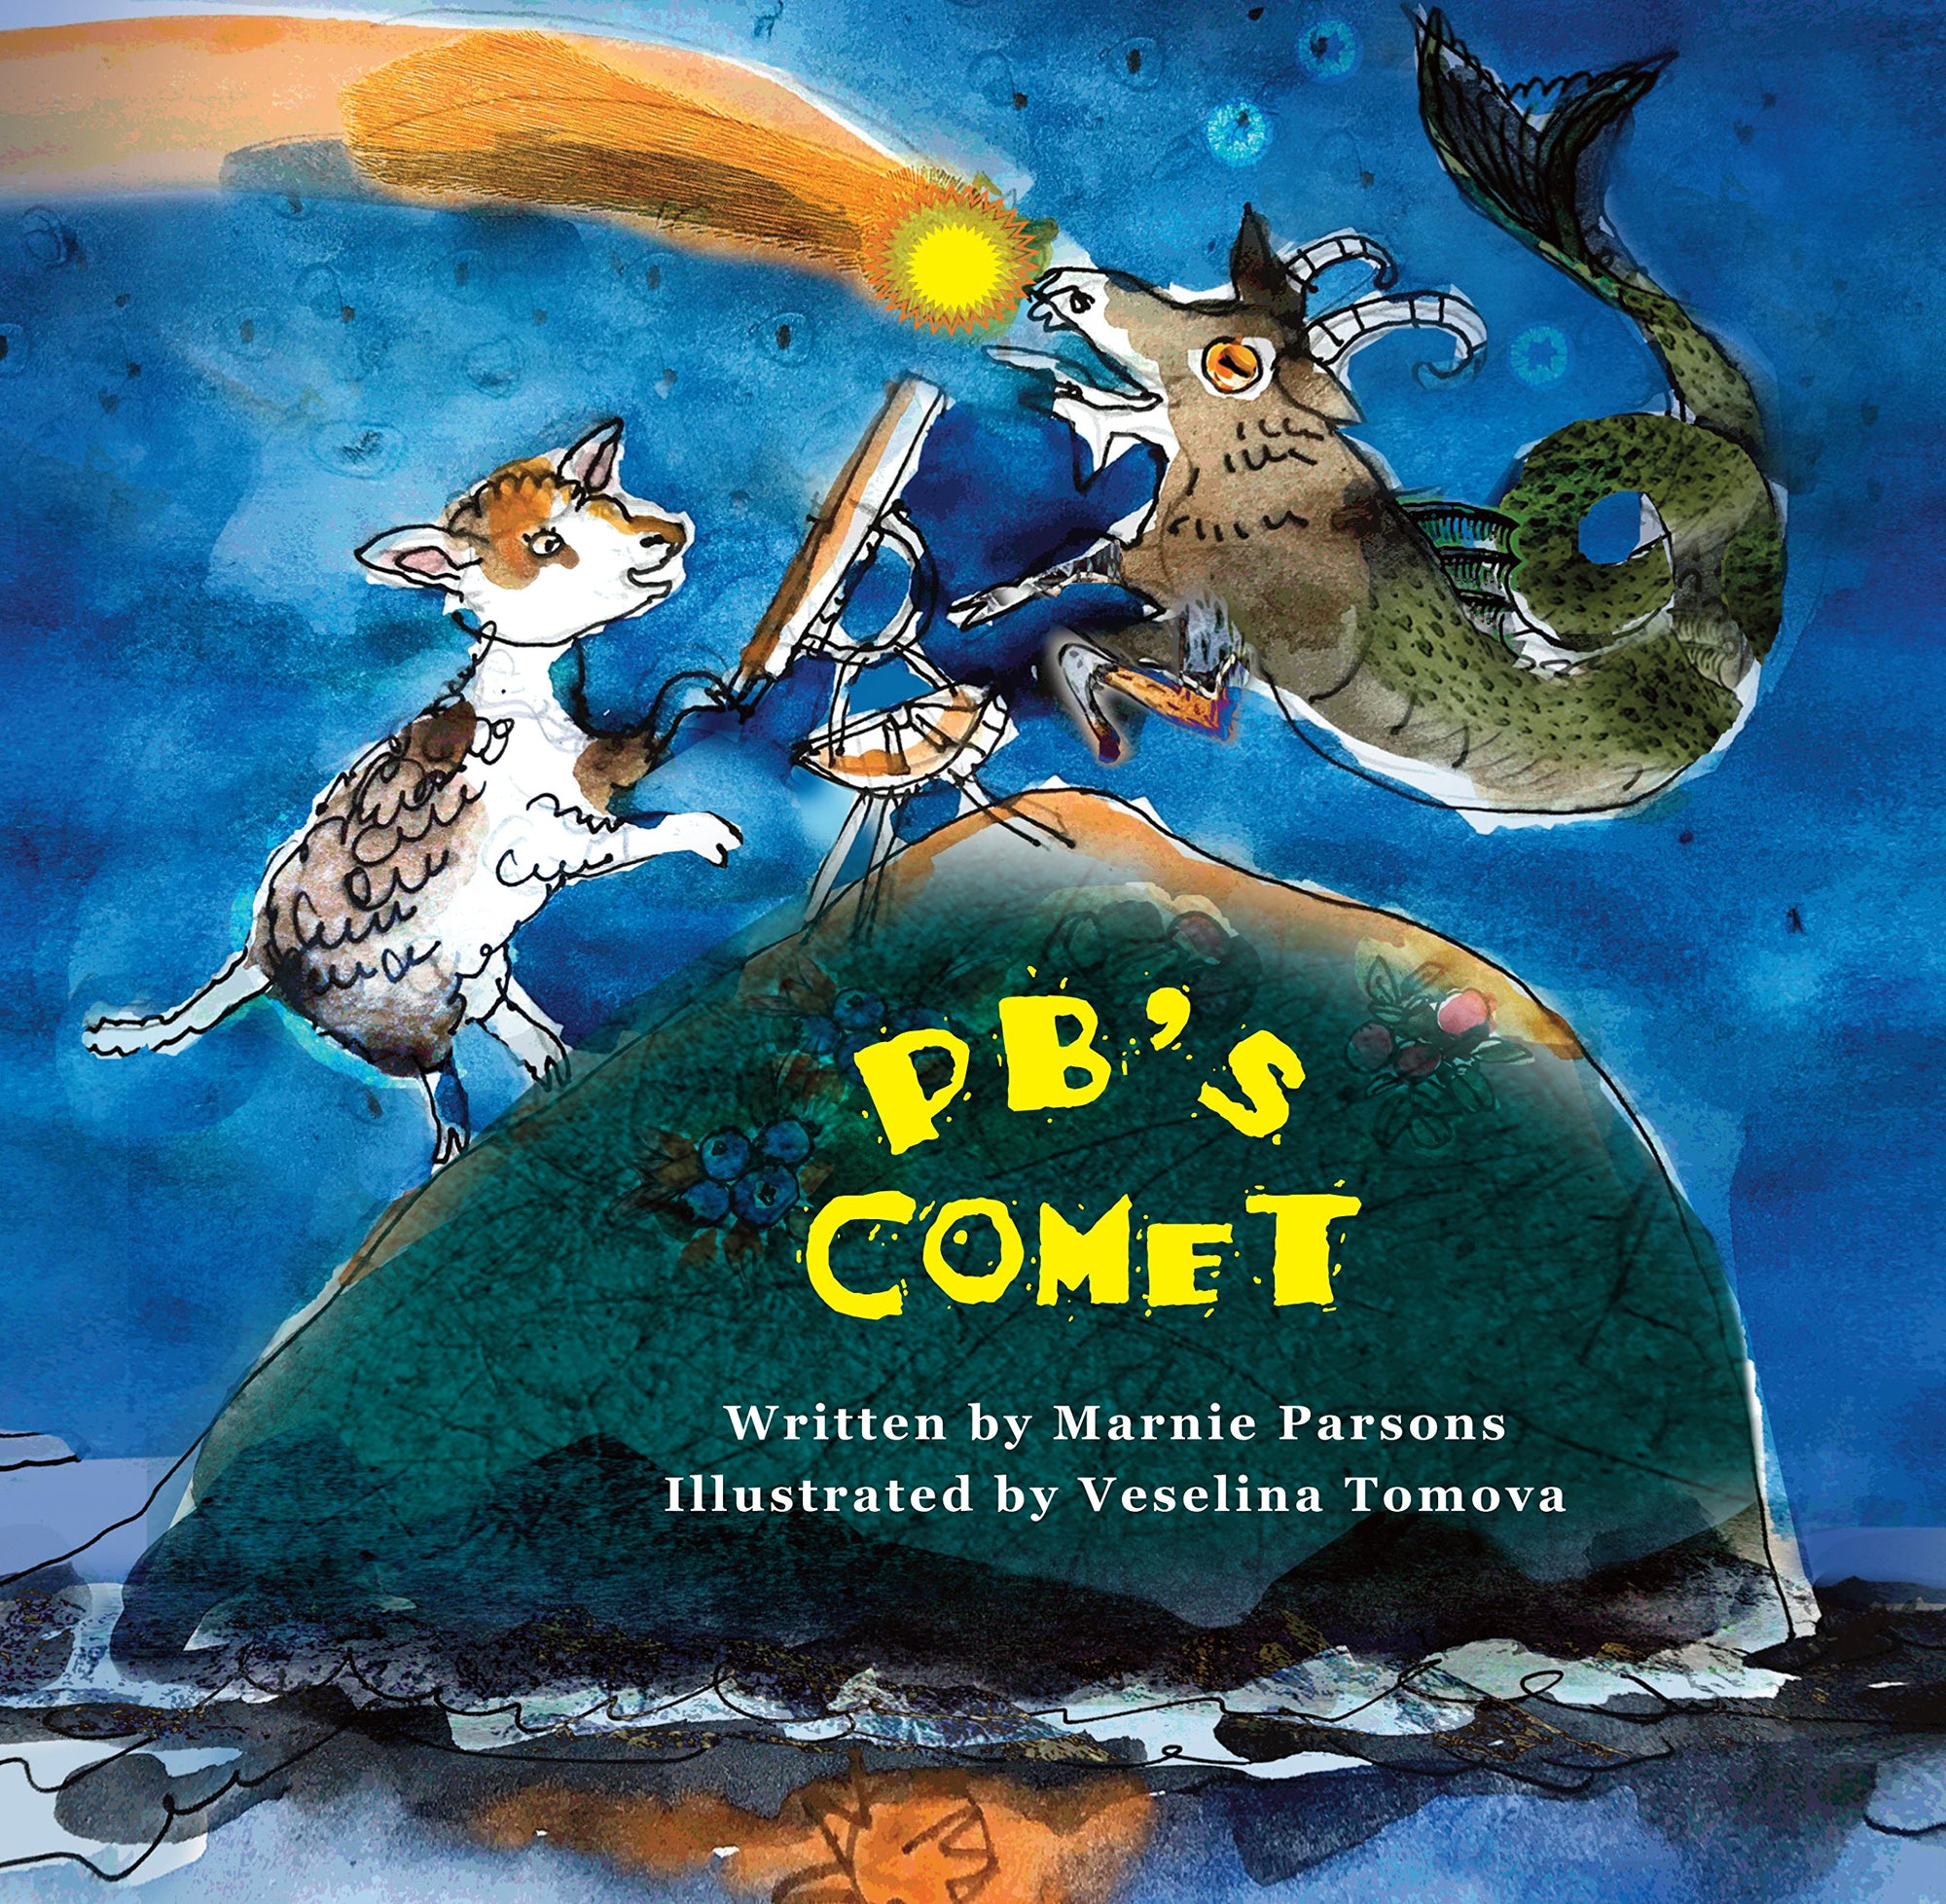 PB’s Comet by Marnie Parsons